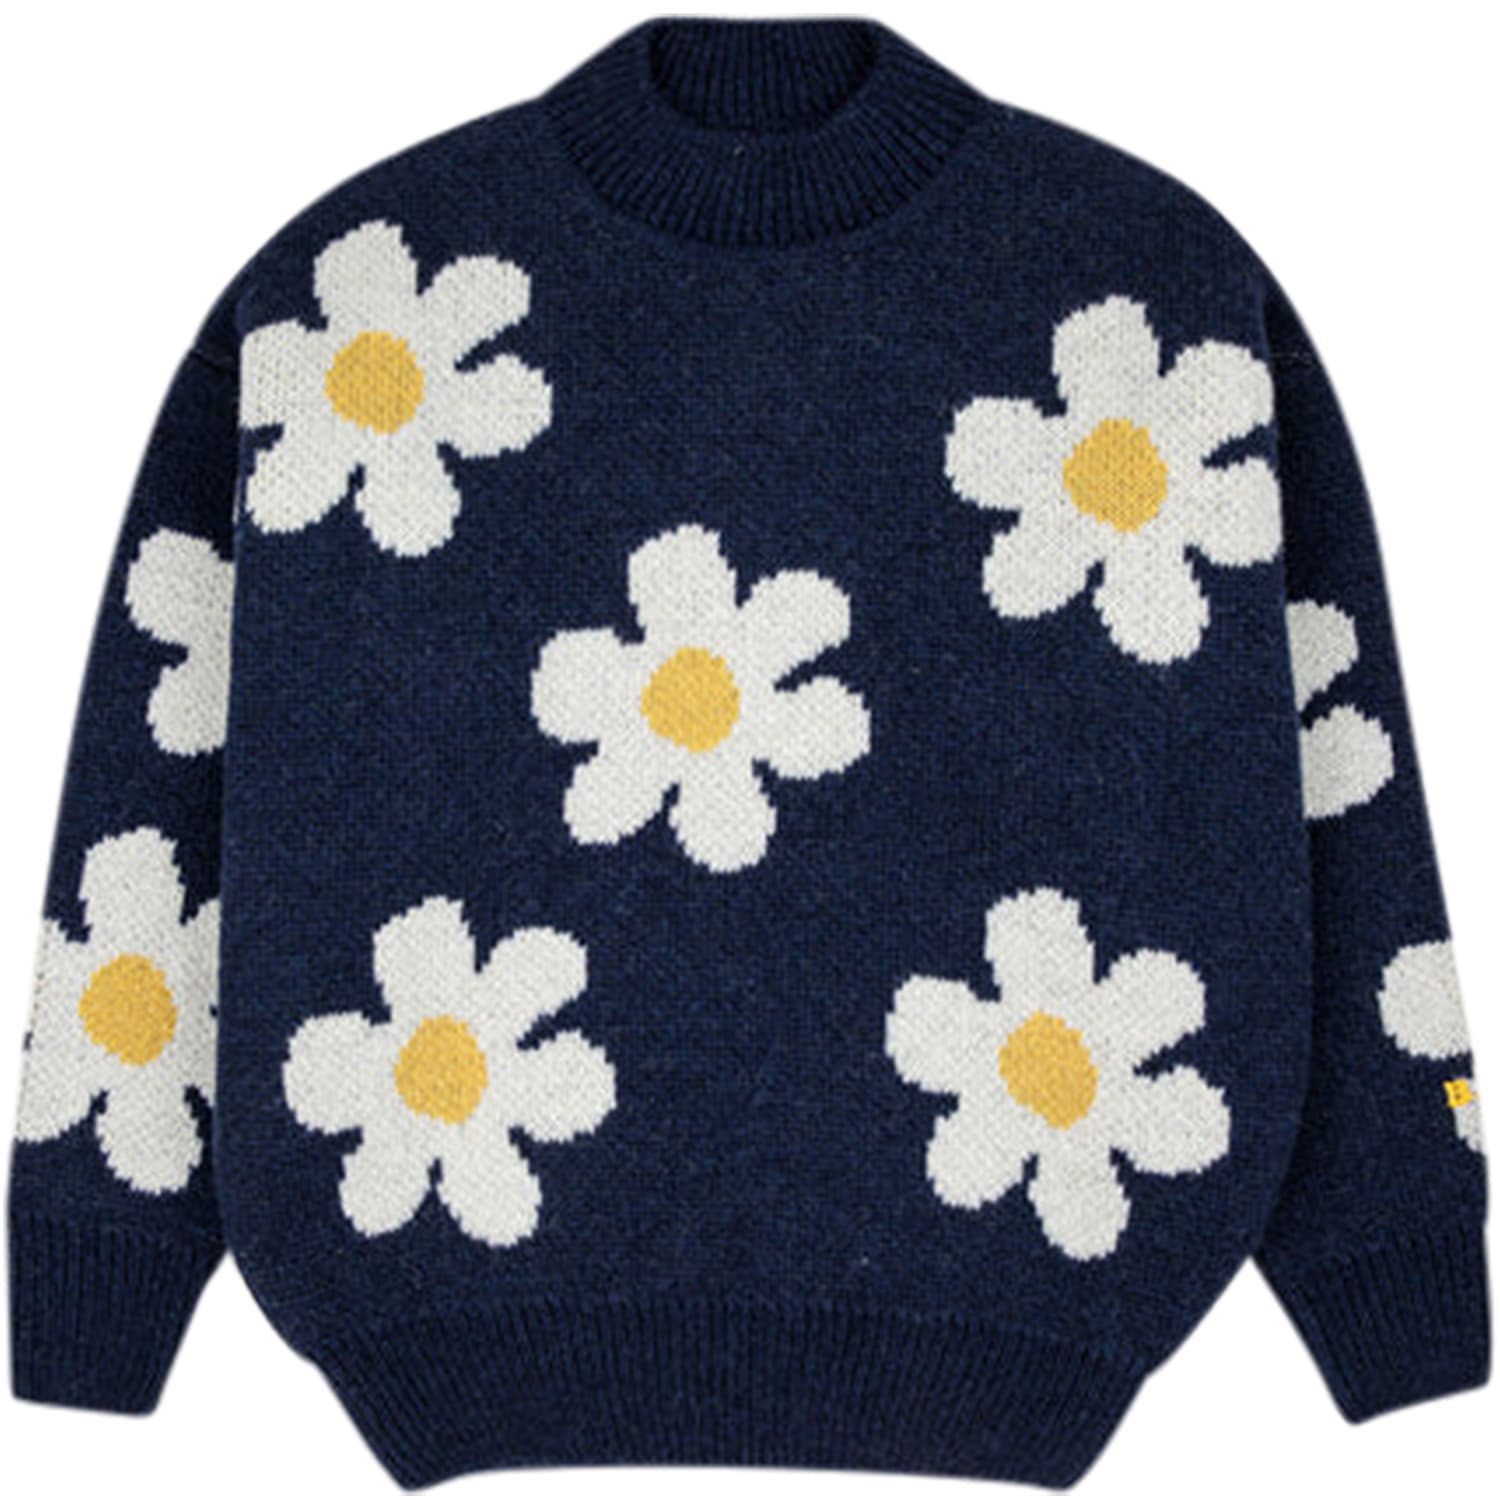 BOBO CHOSES BLUE SWEATER FOR GIRL WITH DAISY EMBROIDERY